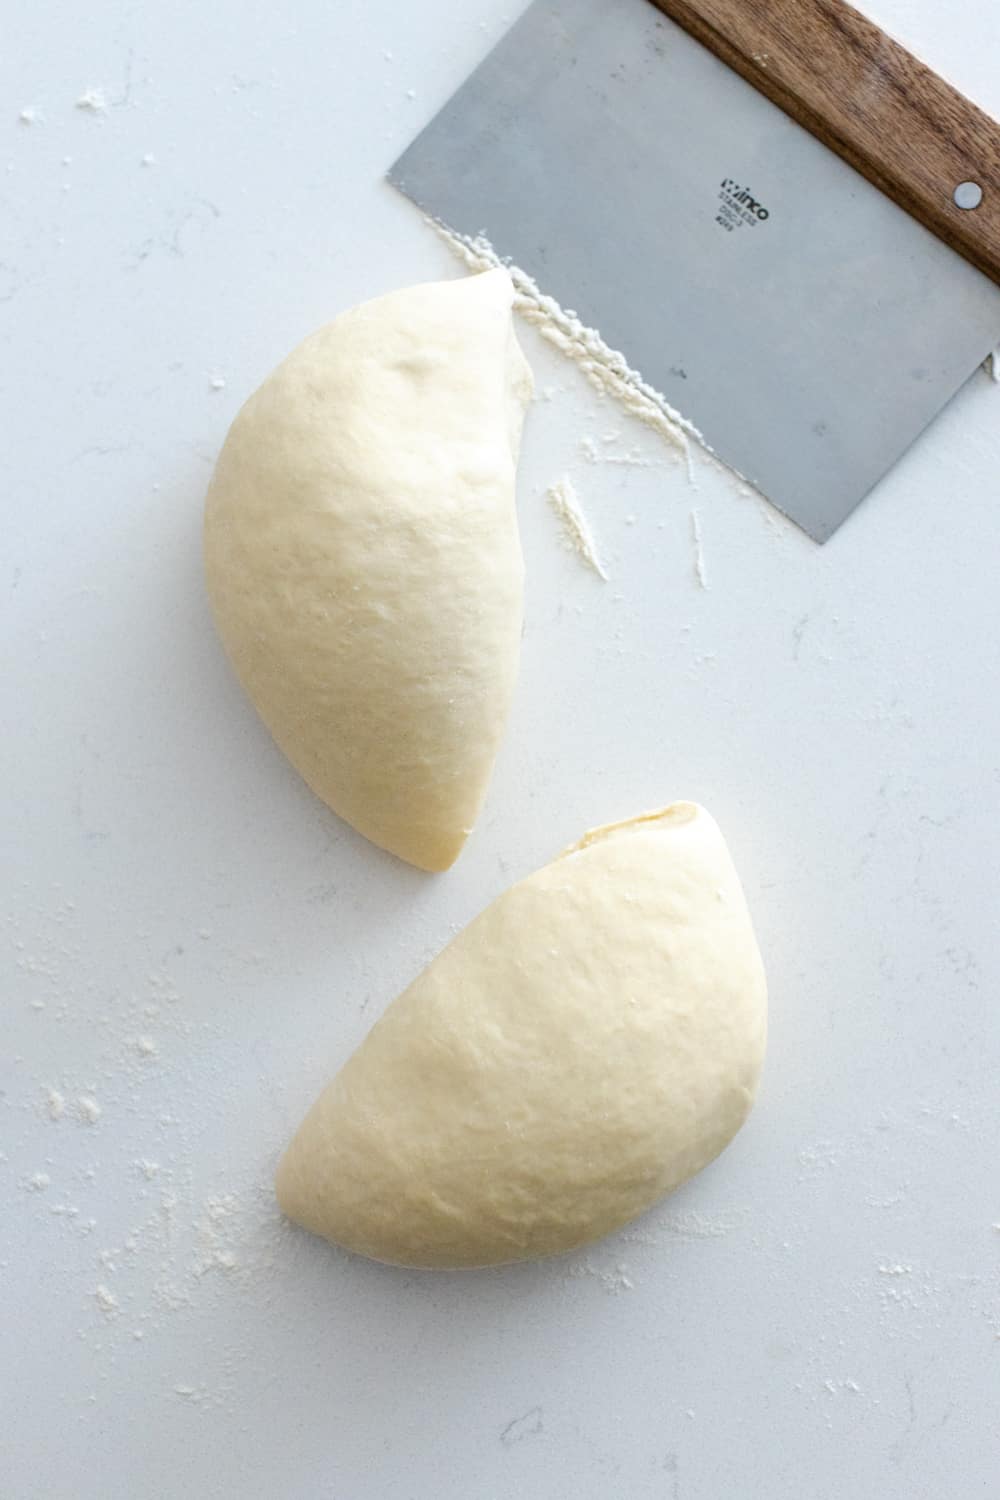 Making Quick and Easy Pizza Dough